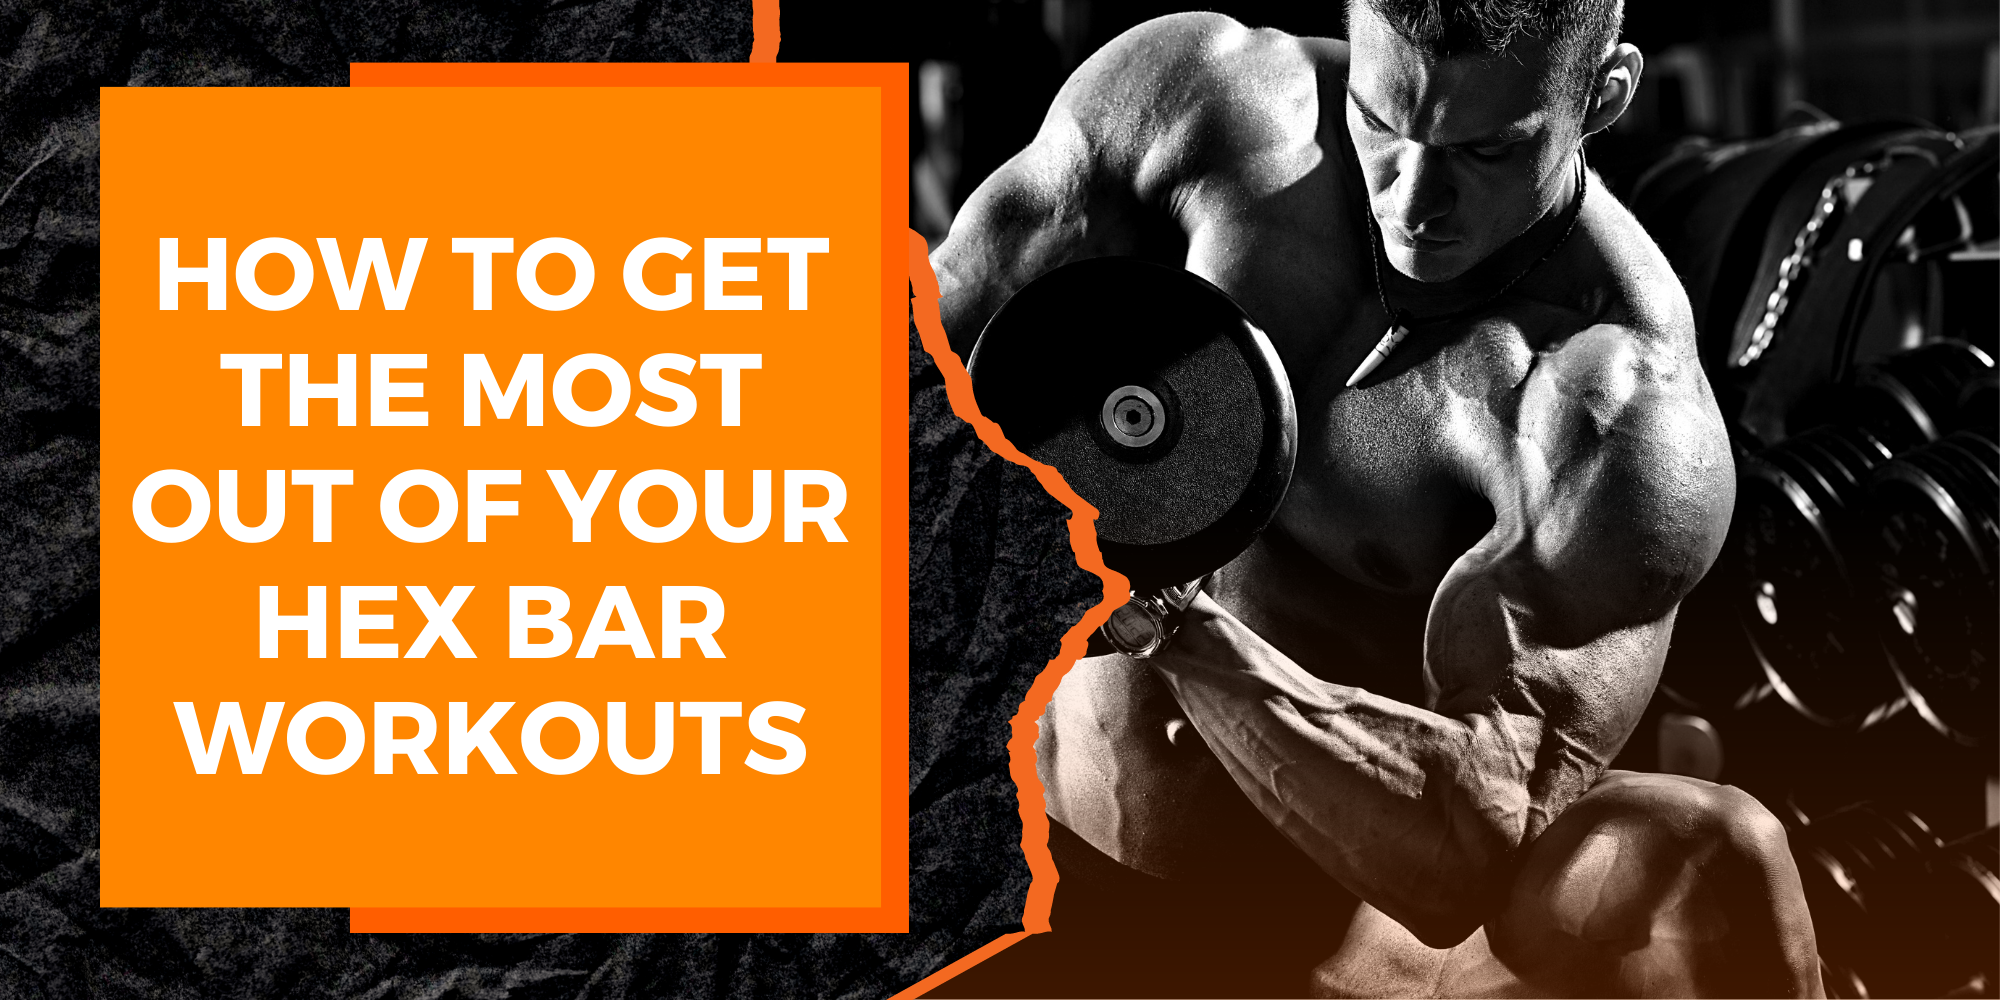 How to Get the Most Out of Your Hex Bar Workouts